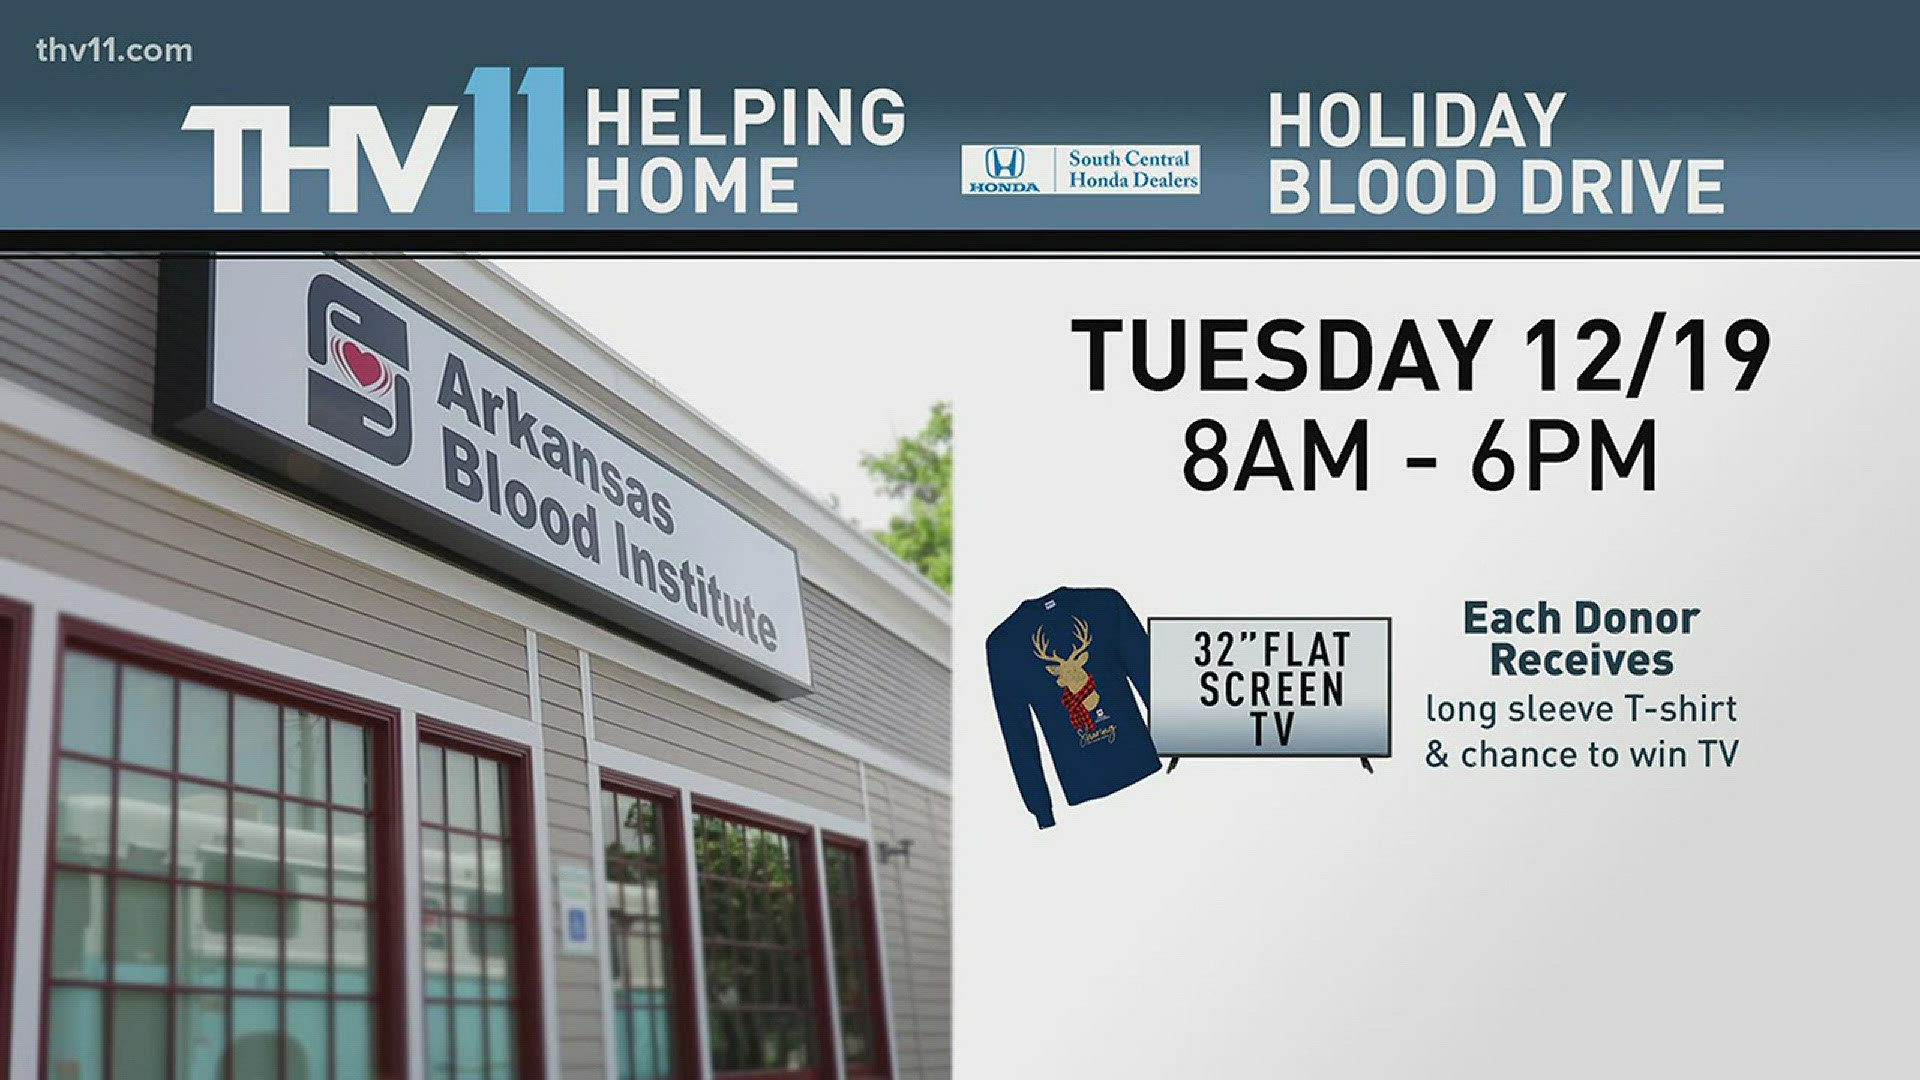 We are partnering with Arkansas Blood Institute to give the gift of life this holiday season.